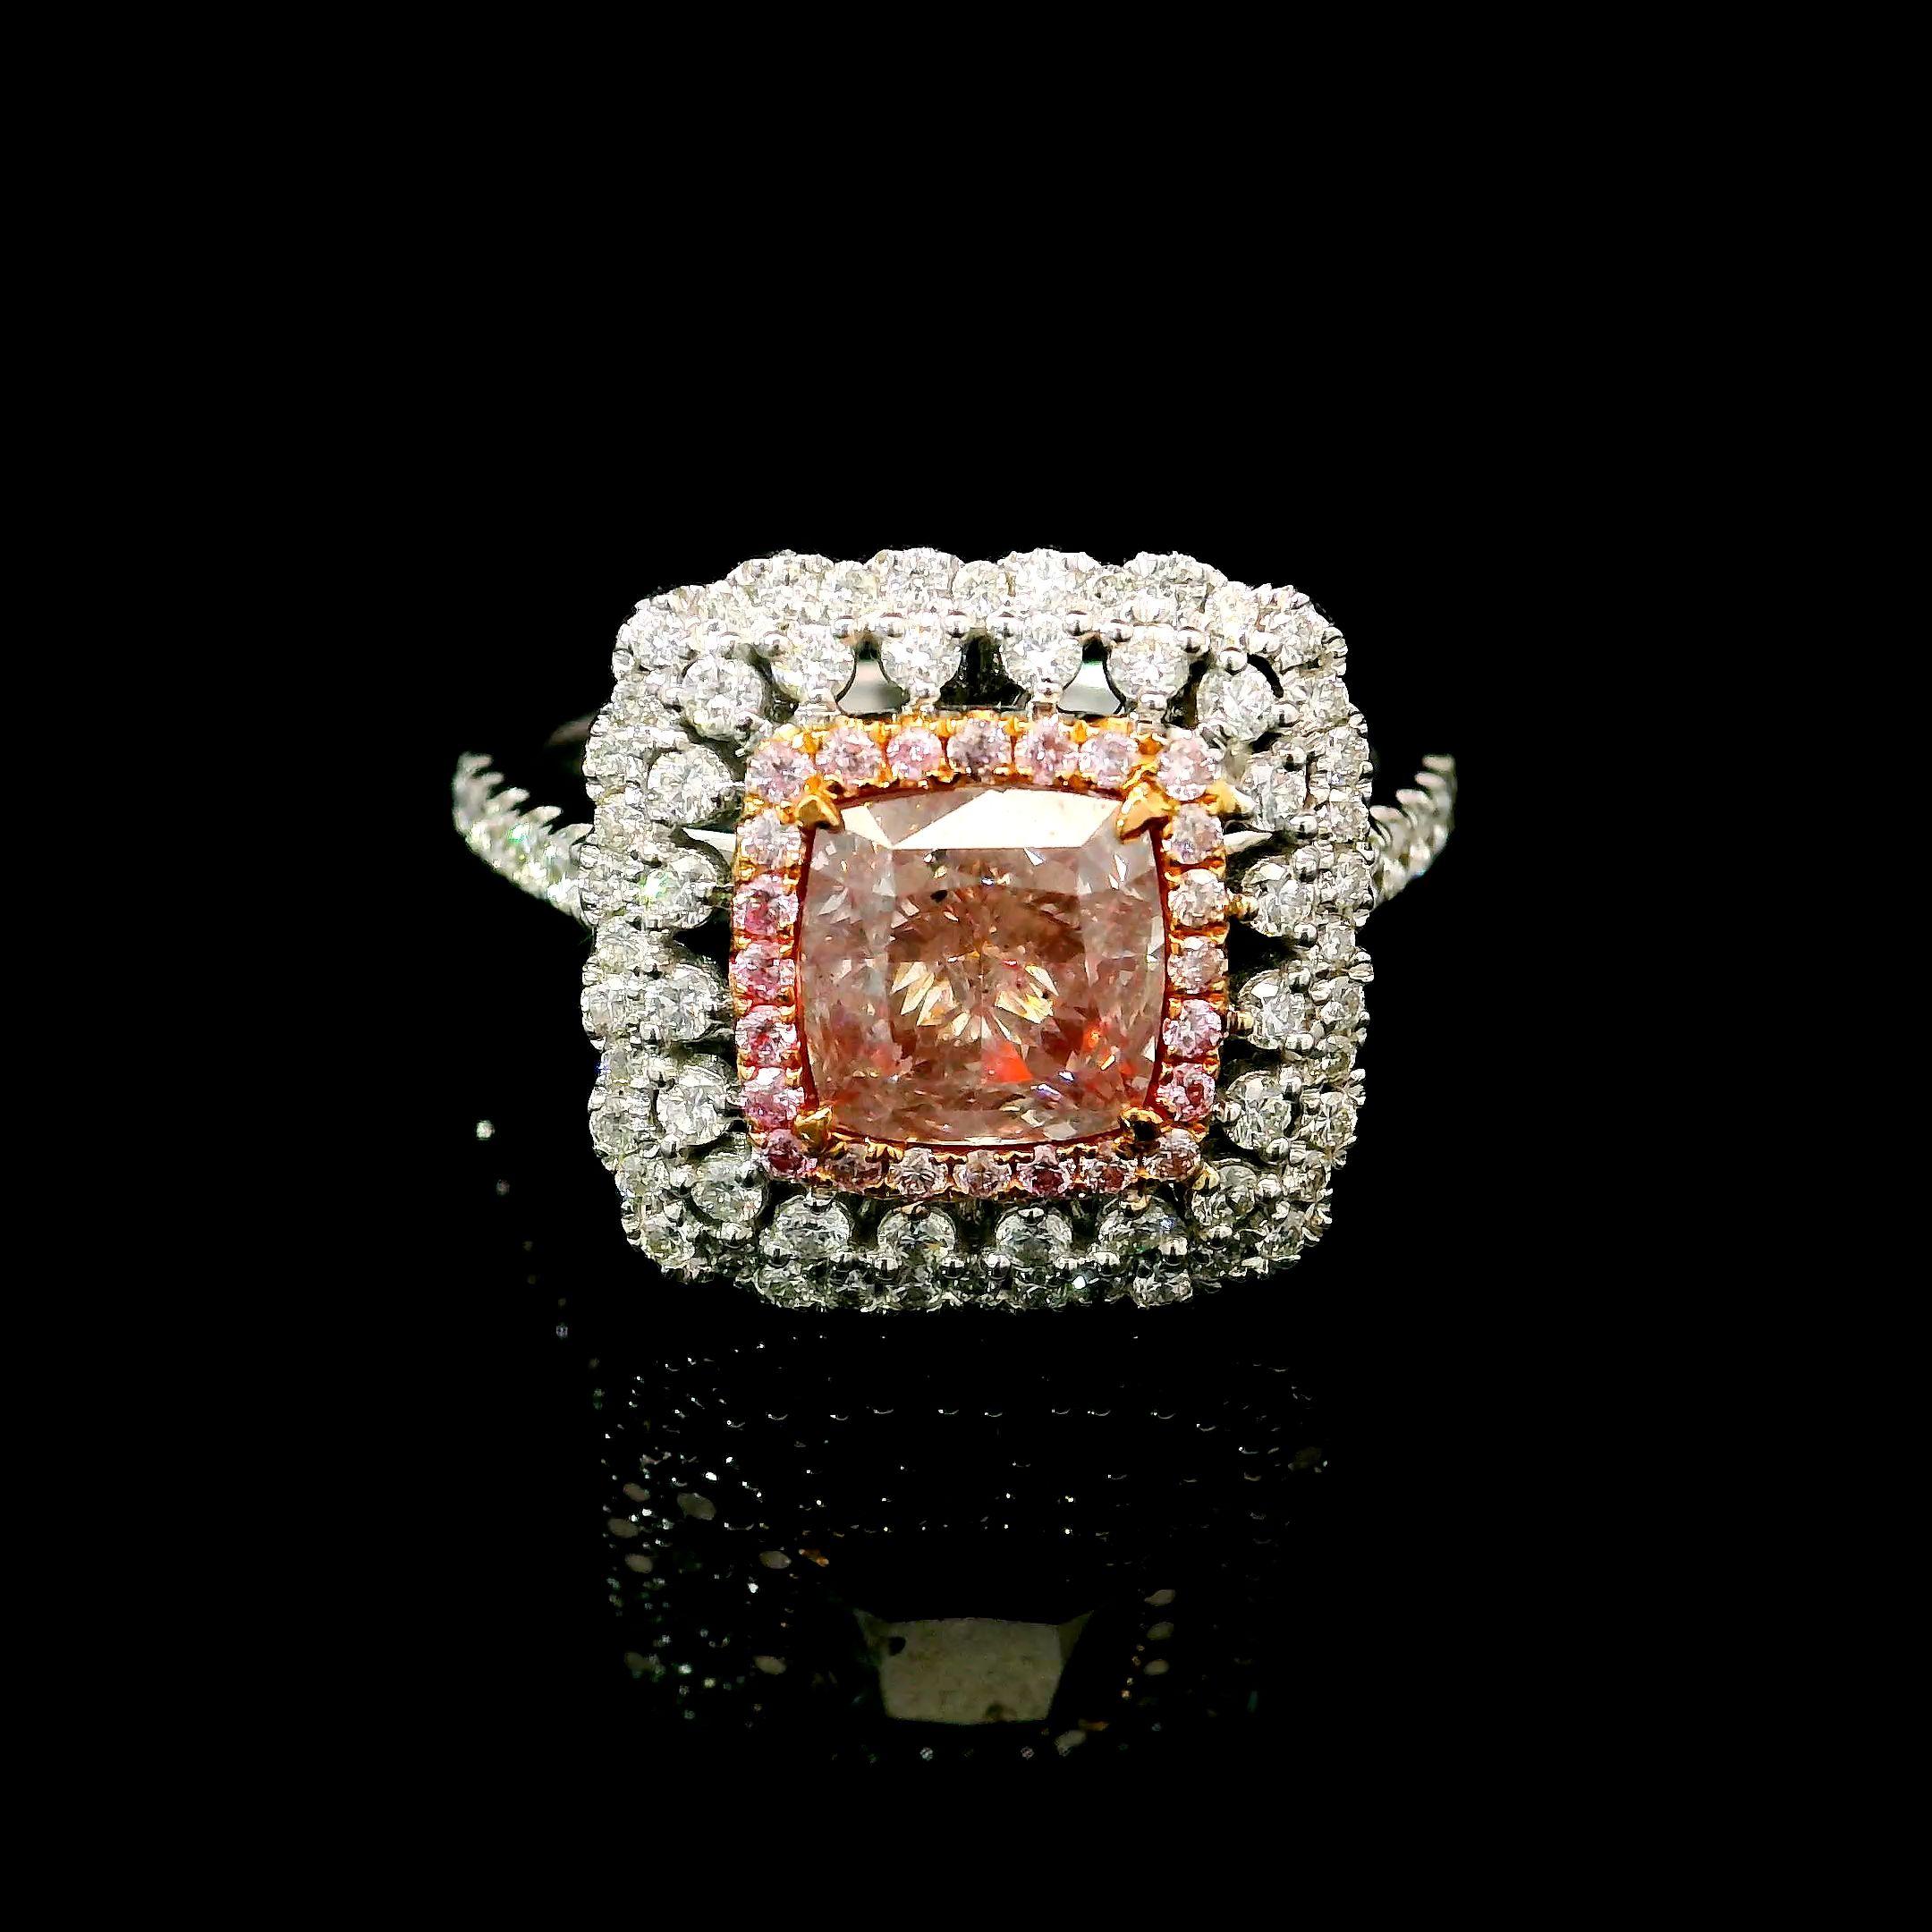 Women's or Men's 1.51 Carat Fancy Light Brownish Pink I1 Clarity GIA Certified For Sale